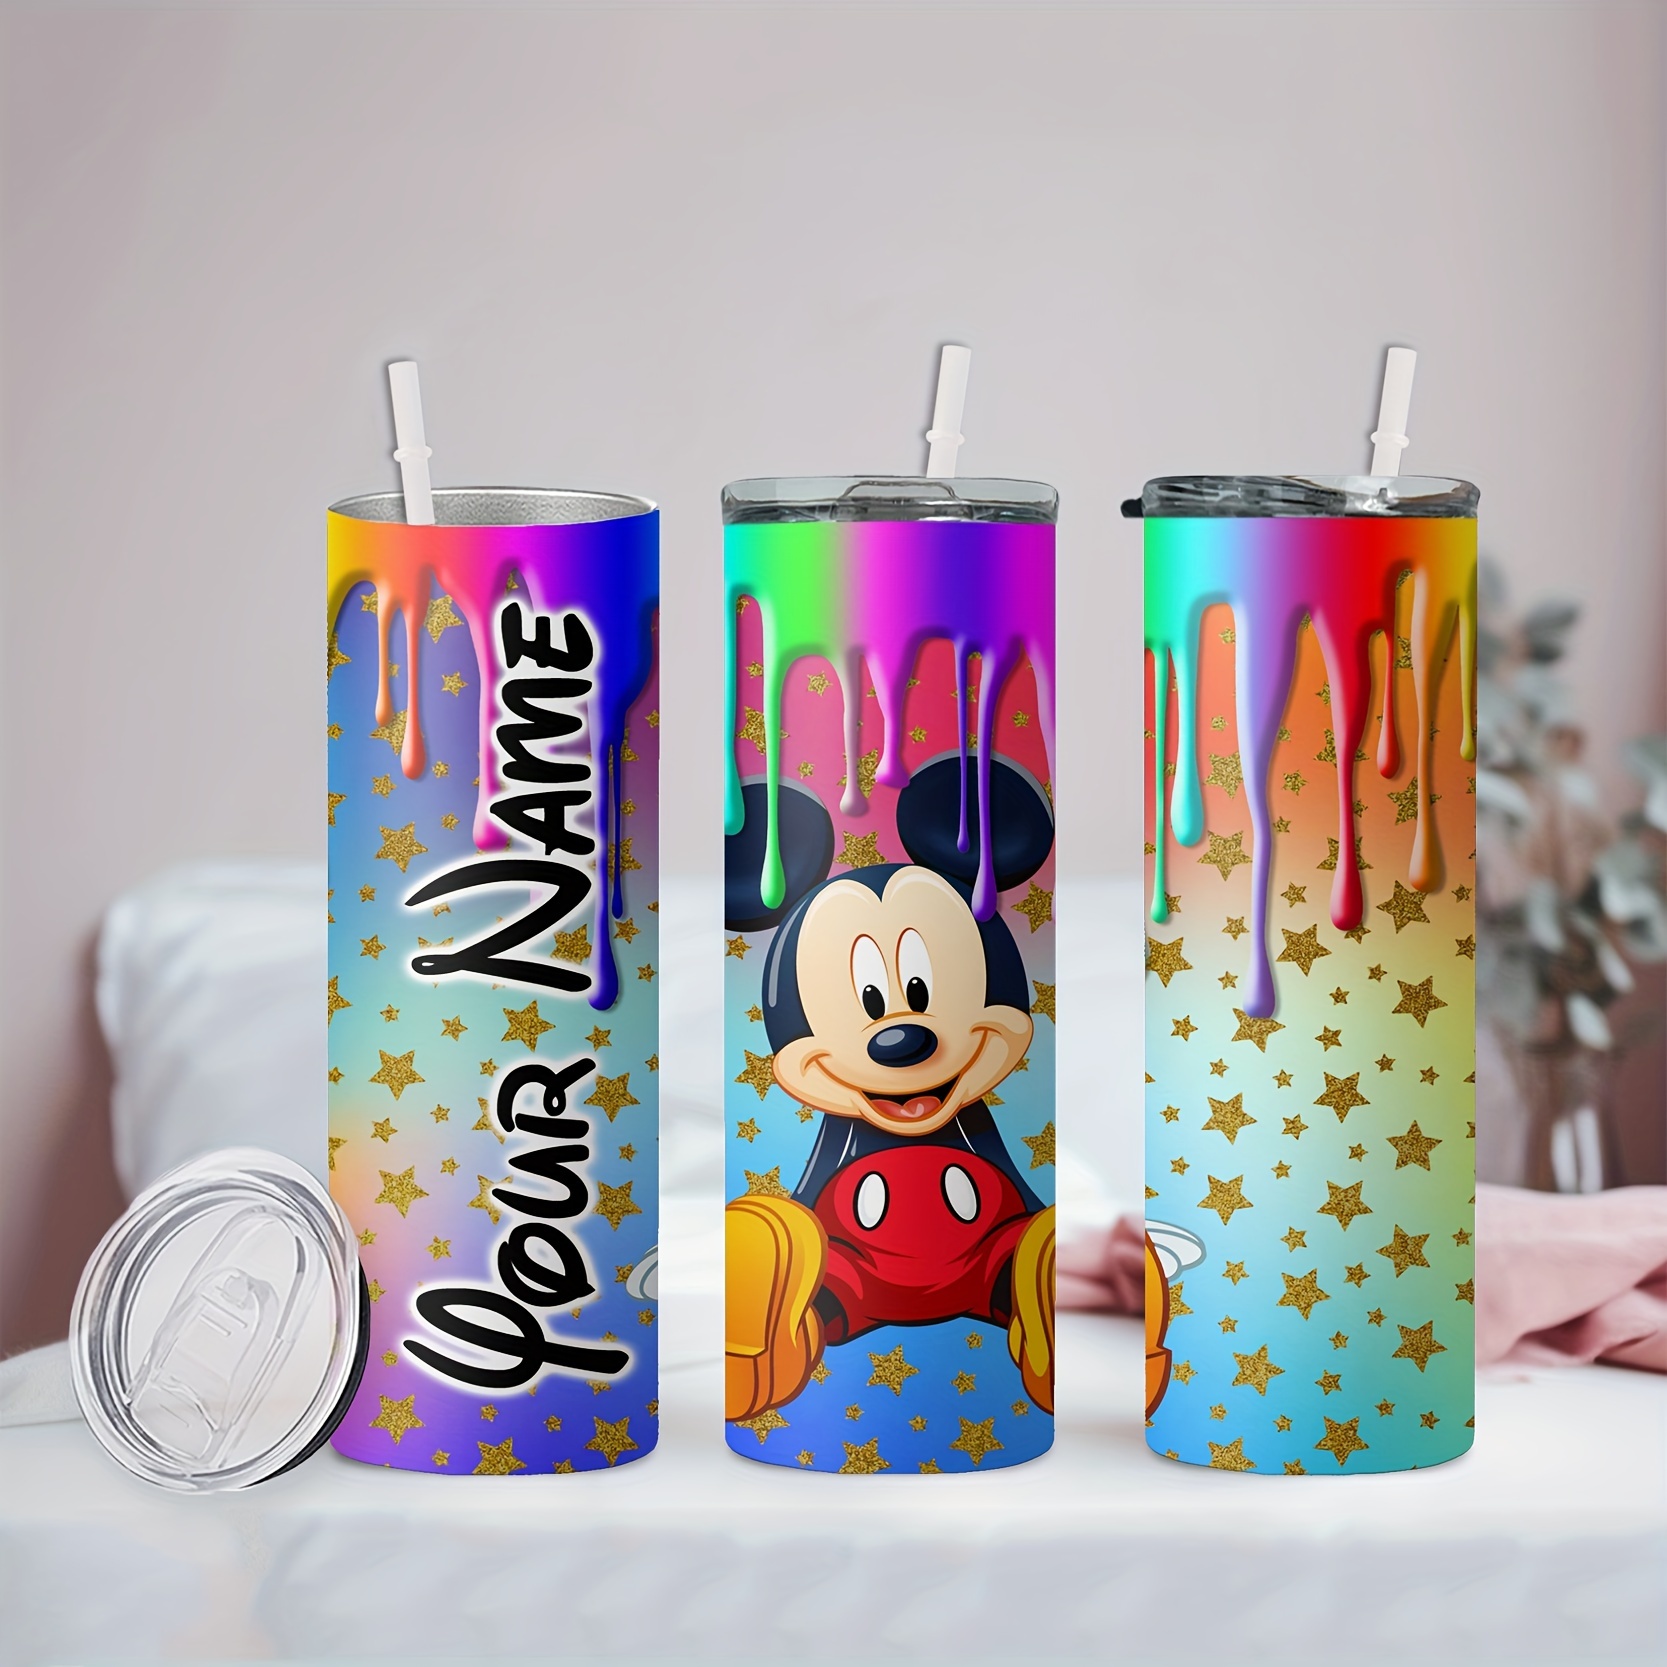 

Customizable 20oz Stainless Steel Tumbler With Mickey Mouse Design, Leak-proof Double-walled Insulated Travel Mug With Lid And Straw, Ideal For Office, Camping, Birthday, Christmas – Ume